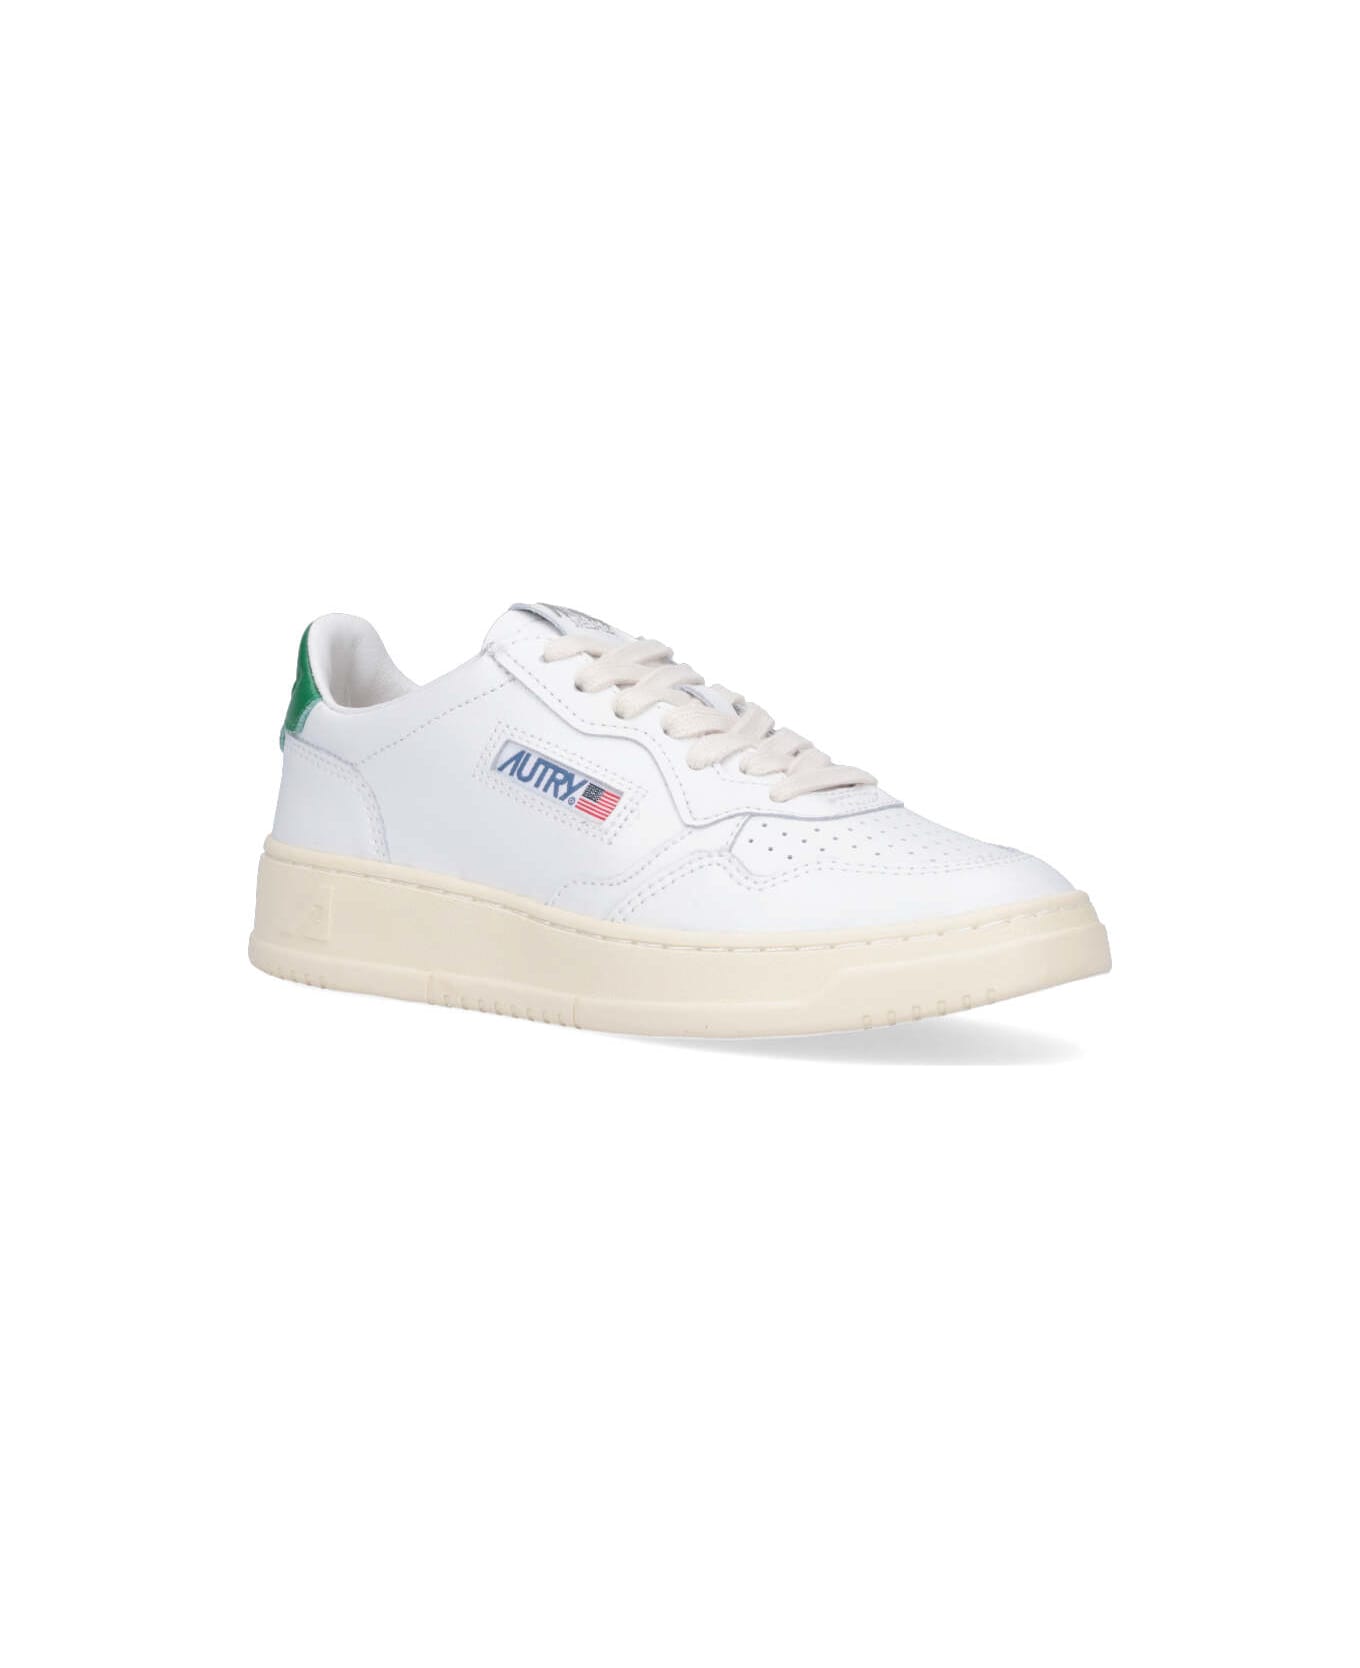 Autry 'medalist' Low Sneakers - Wht/green